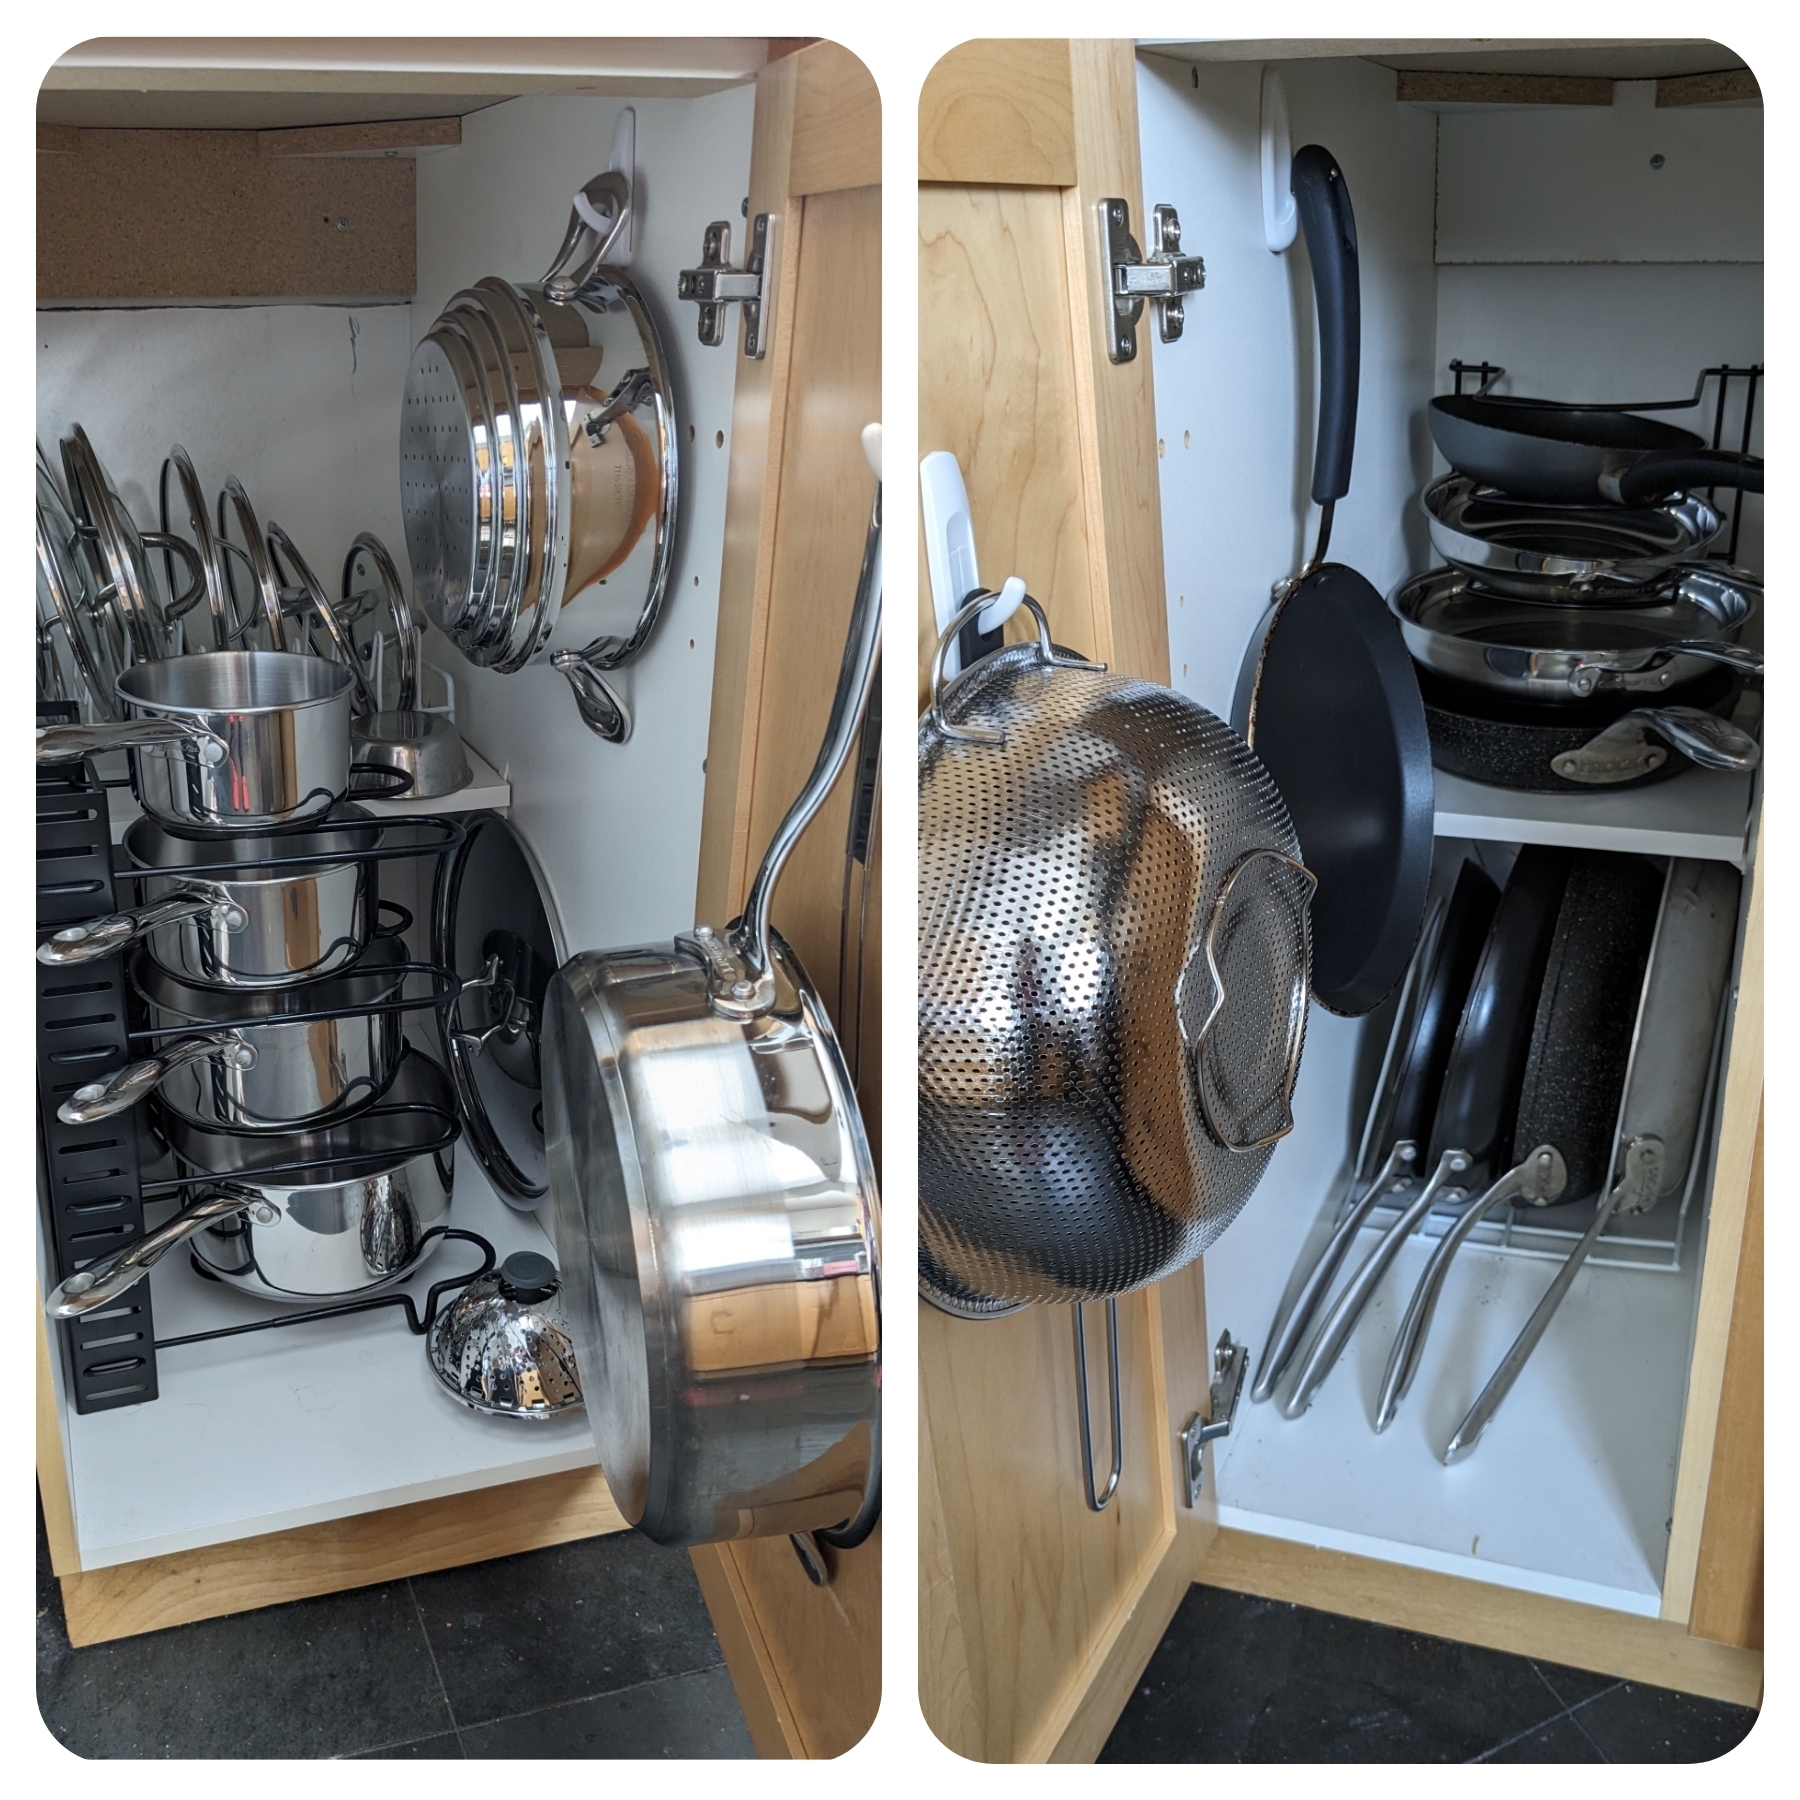 Command hooks and wire organizers holding pots and pans inside a cabinet